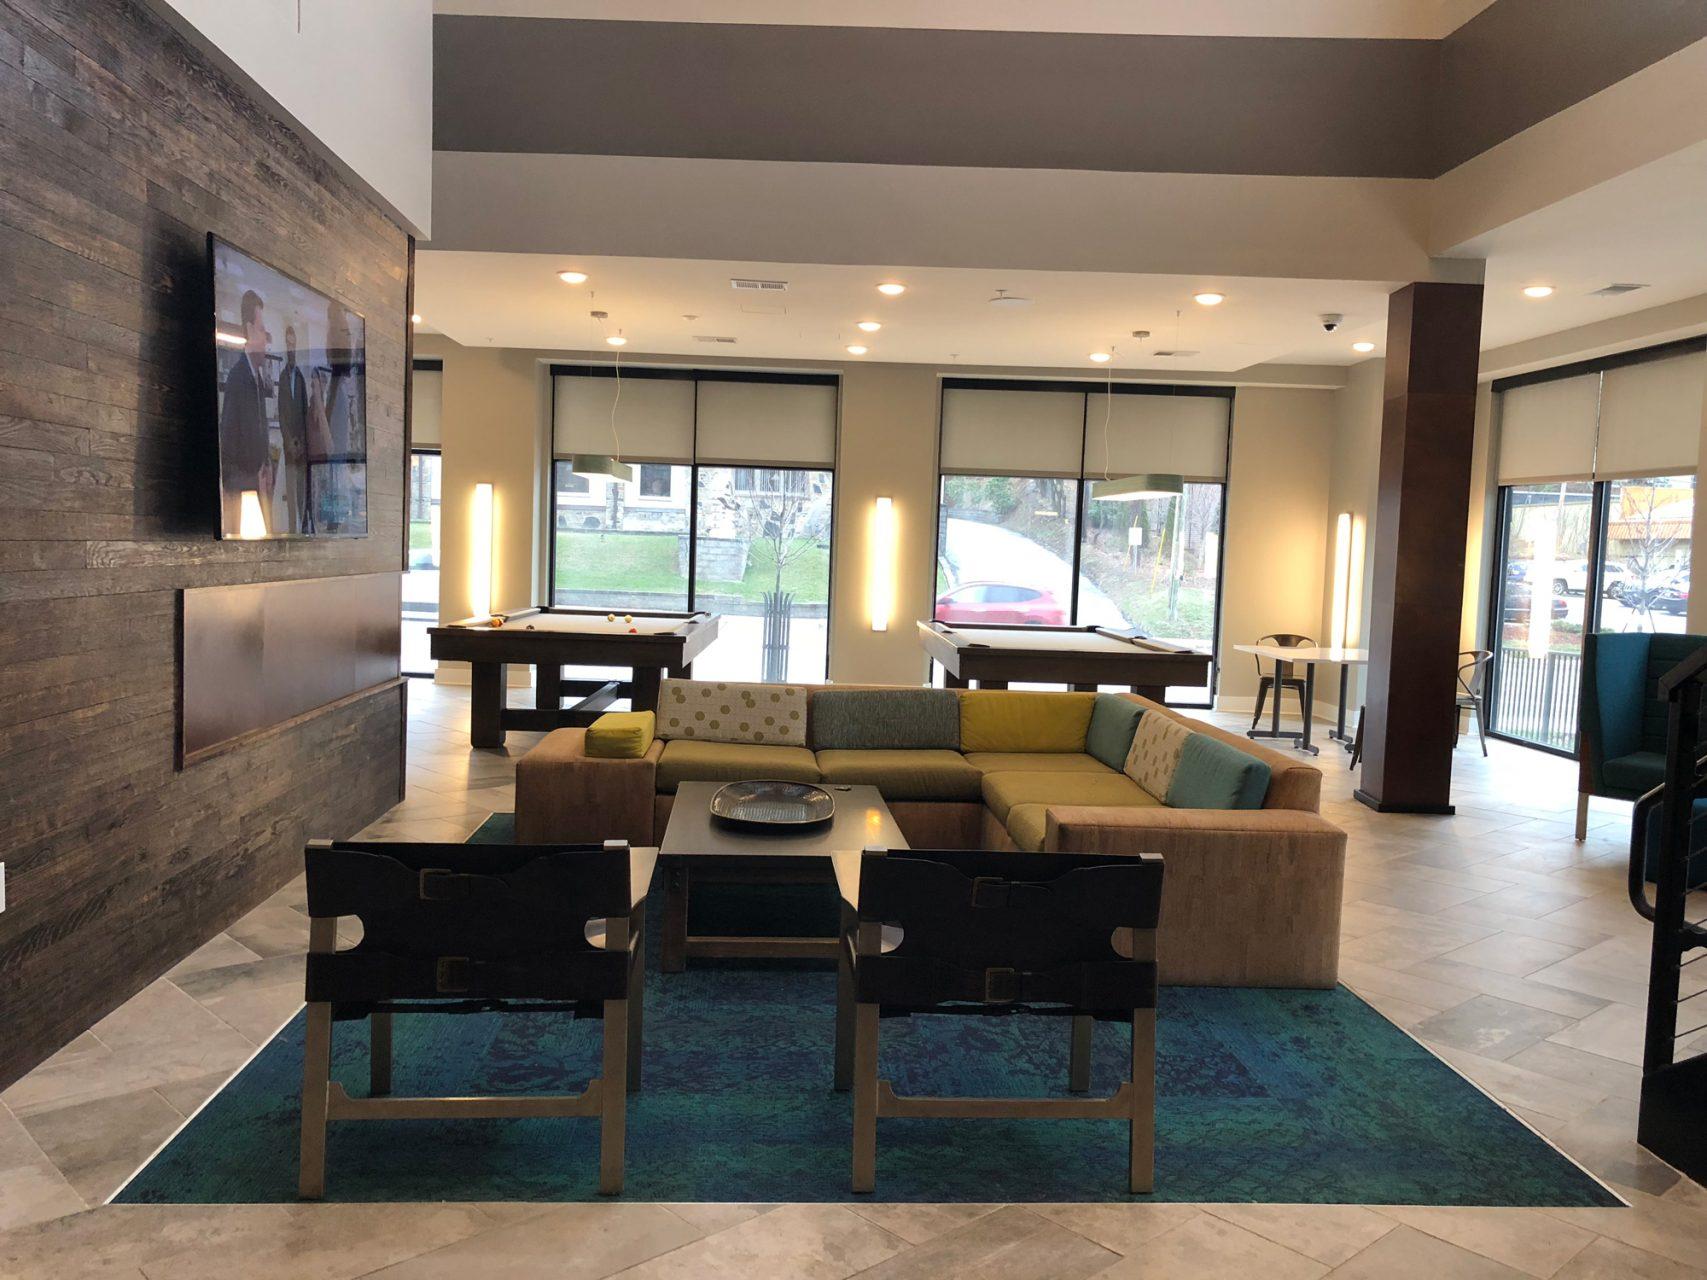 The lobby of the Standard. The apartments are off campus and located on Blowing Rock road. 